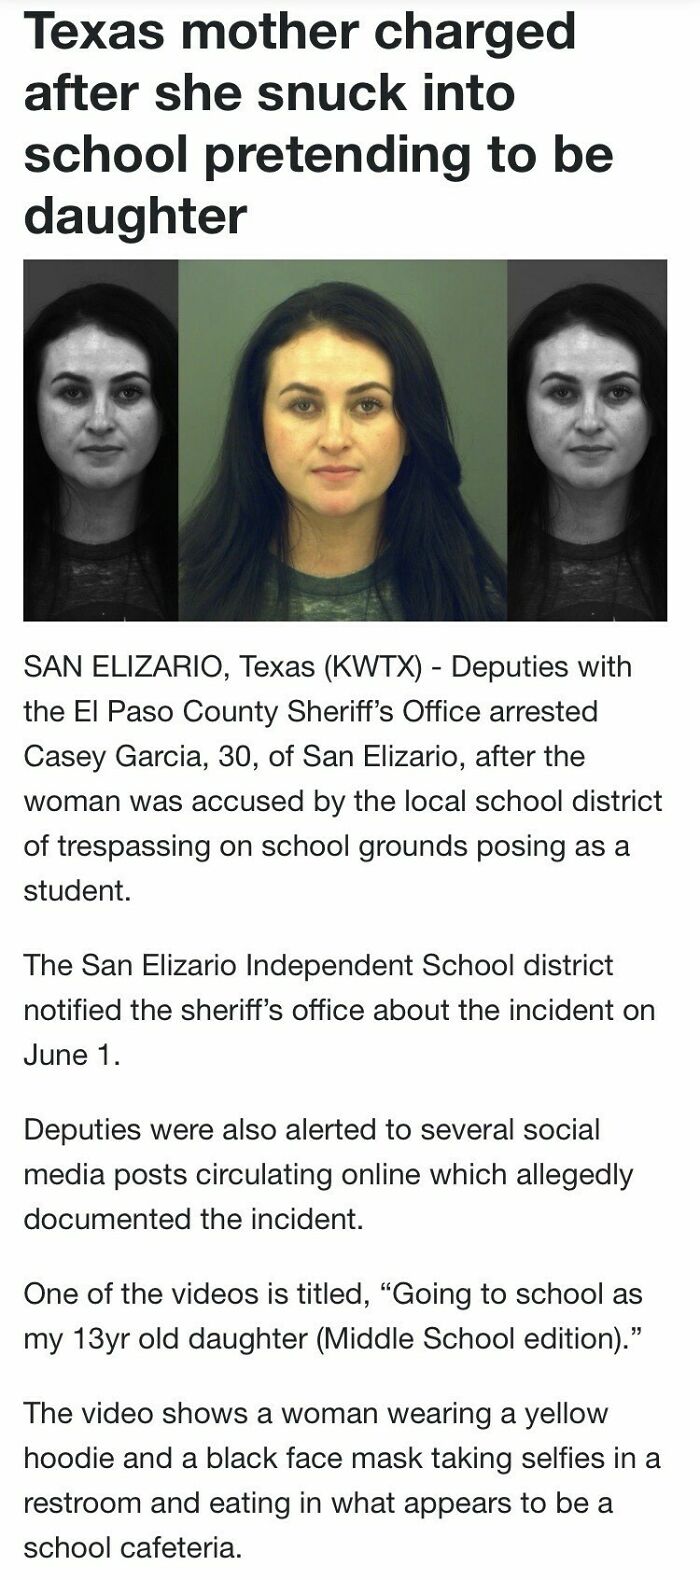 Texas Mother Poses As 13-Year-Old Daughter And Attends Her Class For Social Media Attention - Gets Arrested